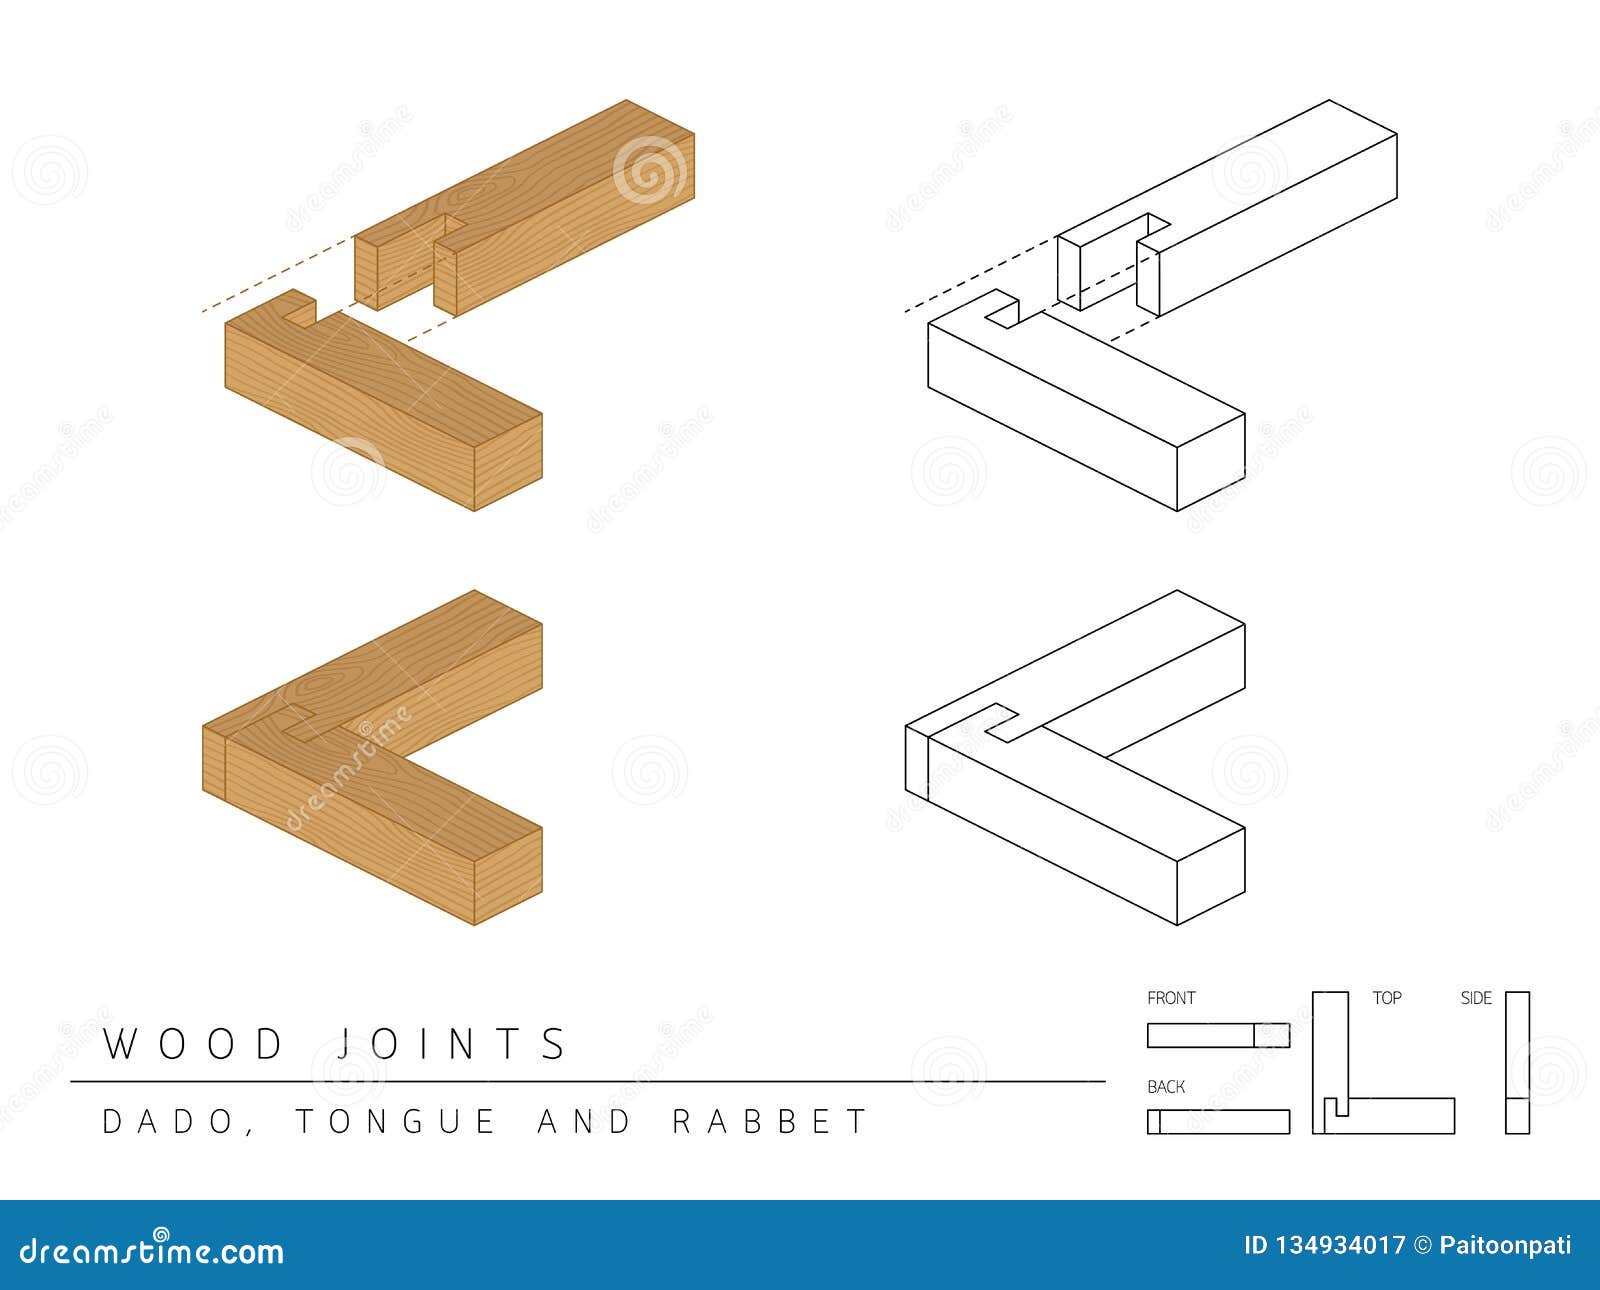 type of wood joint set dado, tongue and rabbet style, perspective 3d with top front side and back view  on white